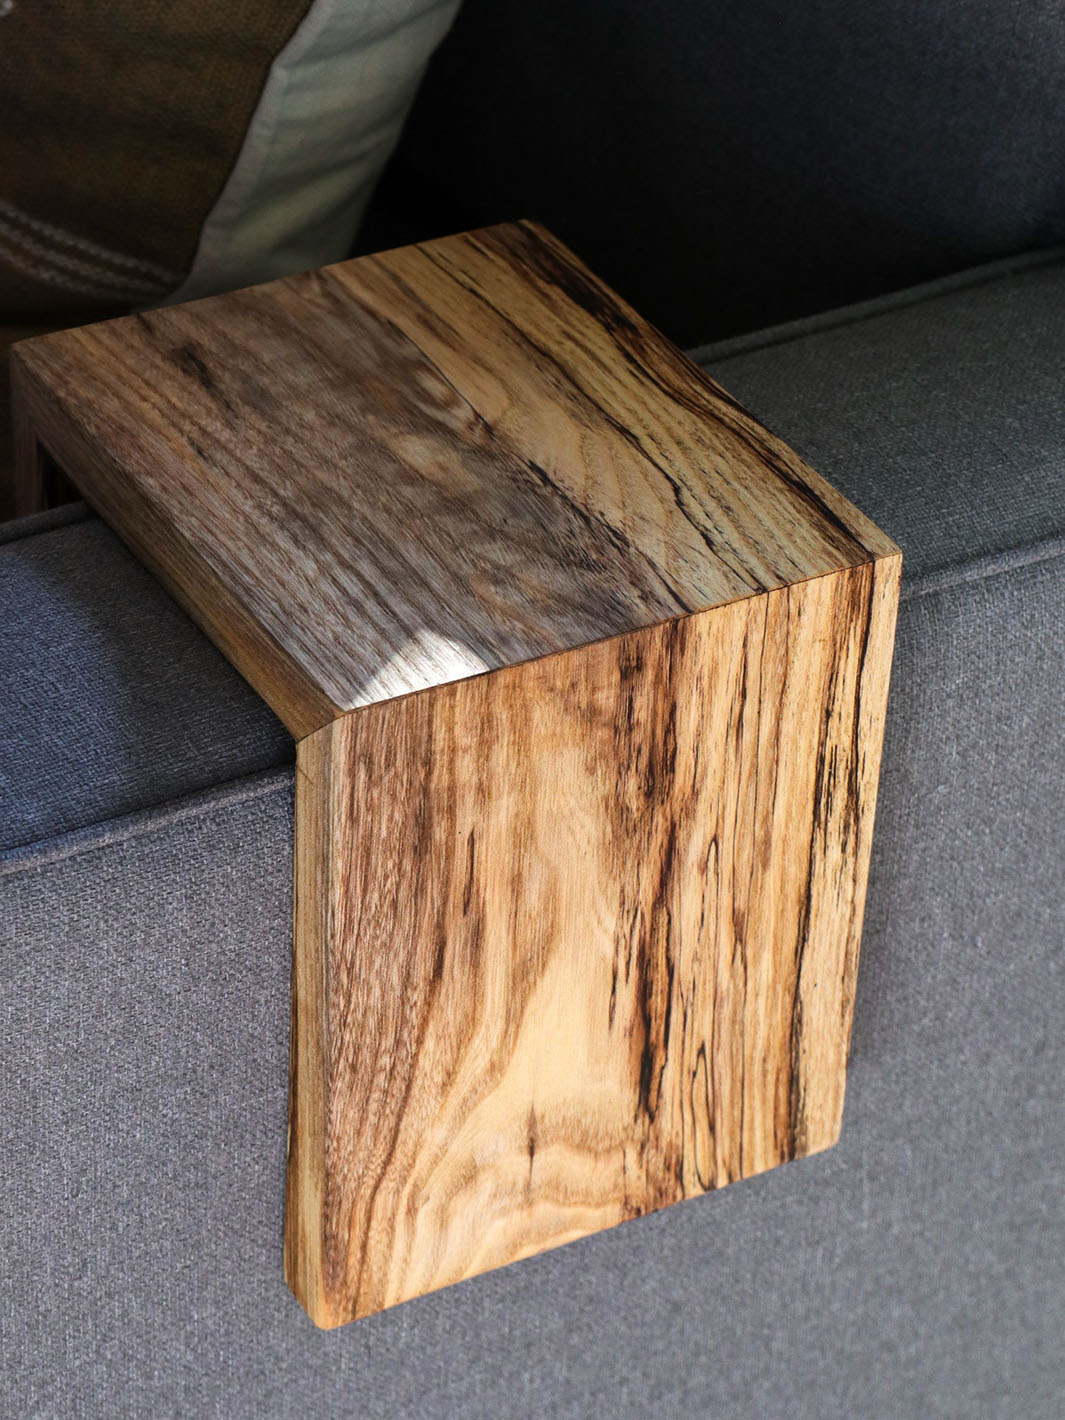 Earthly Comfort 6" Spalted Hackberry Armrest Table Earthly Comfort Coffee Tables 2091-2